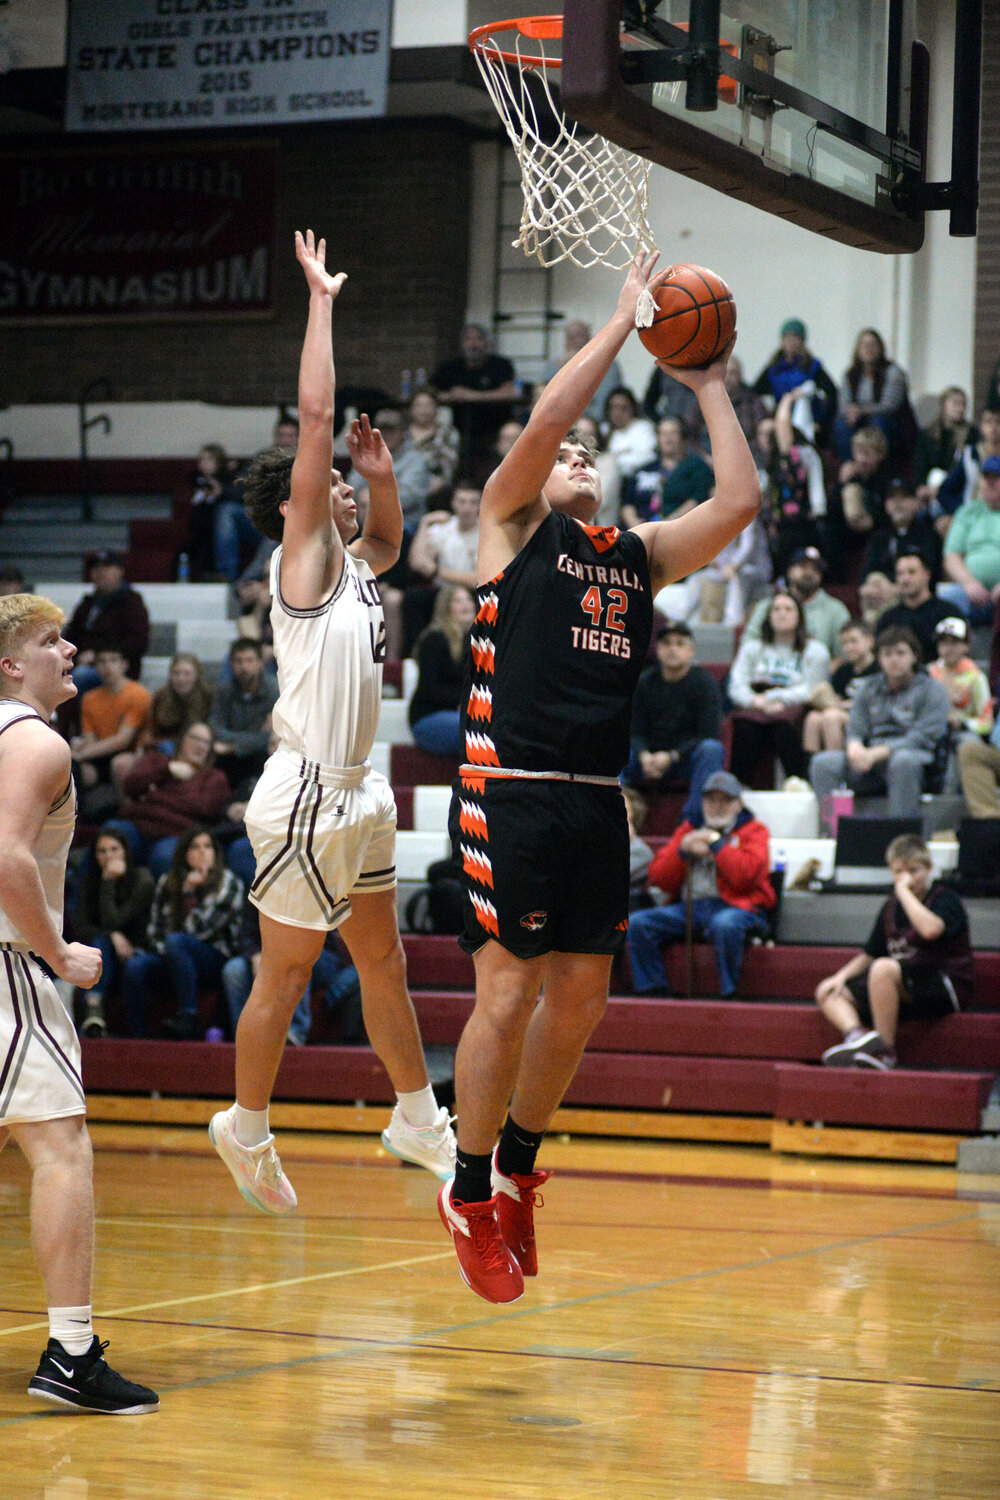 Centralia center David Daarud (42) scores against Montesano's Gabe Bodwell during the second half of the Tigers' 69-43 loss on Tuesday in Montesano.